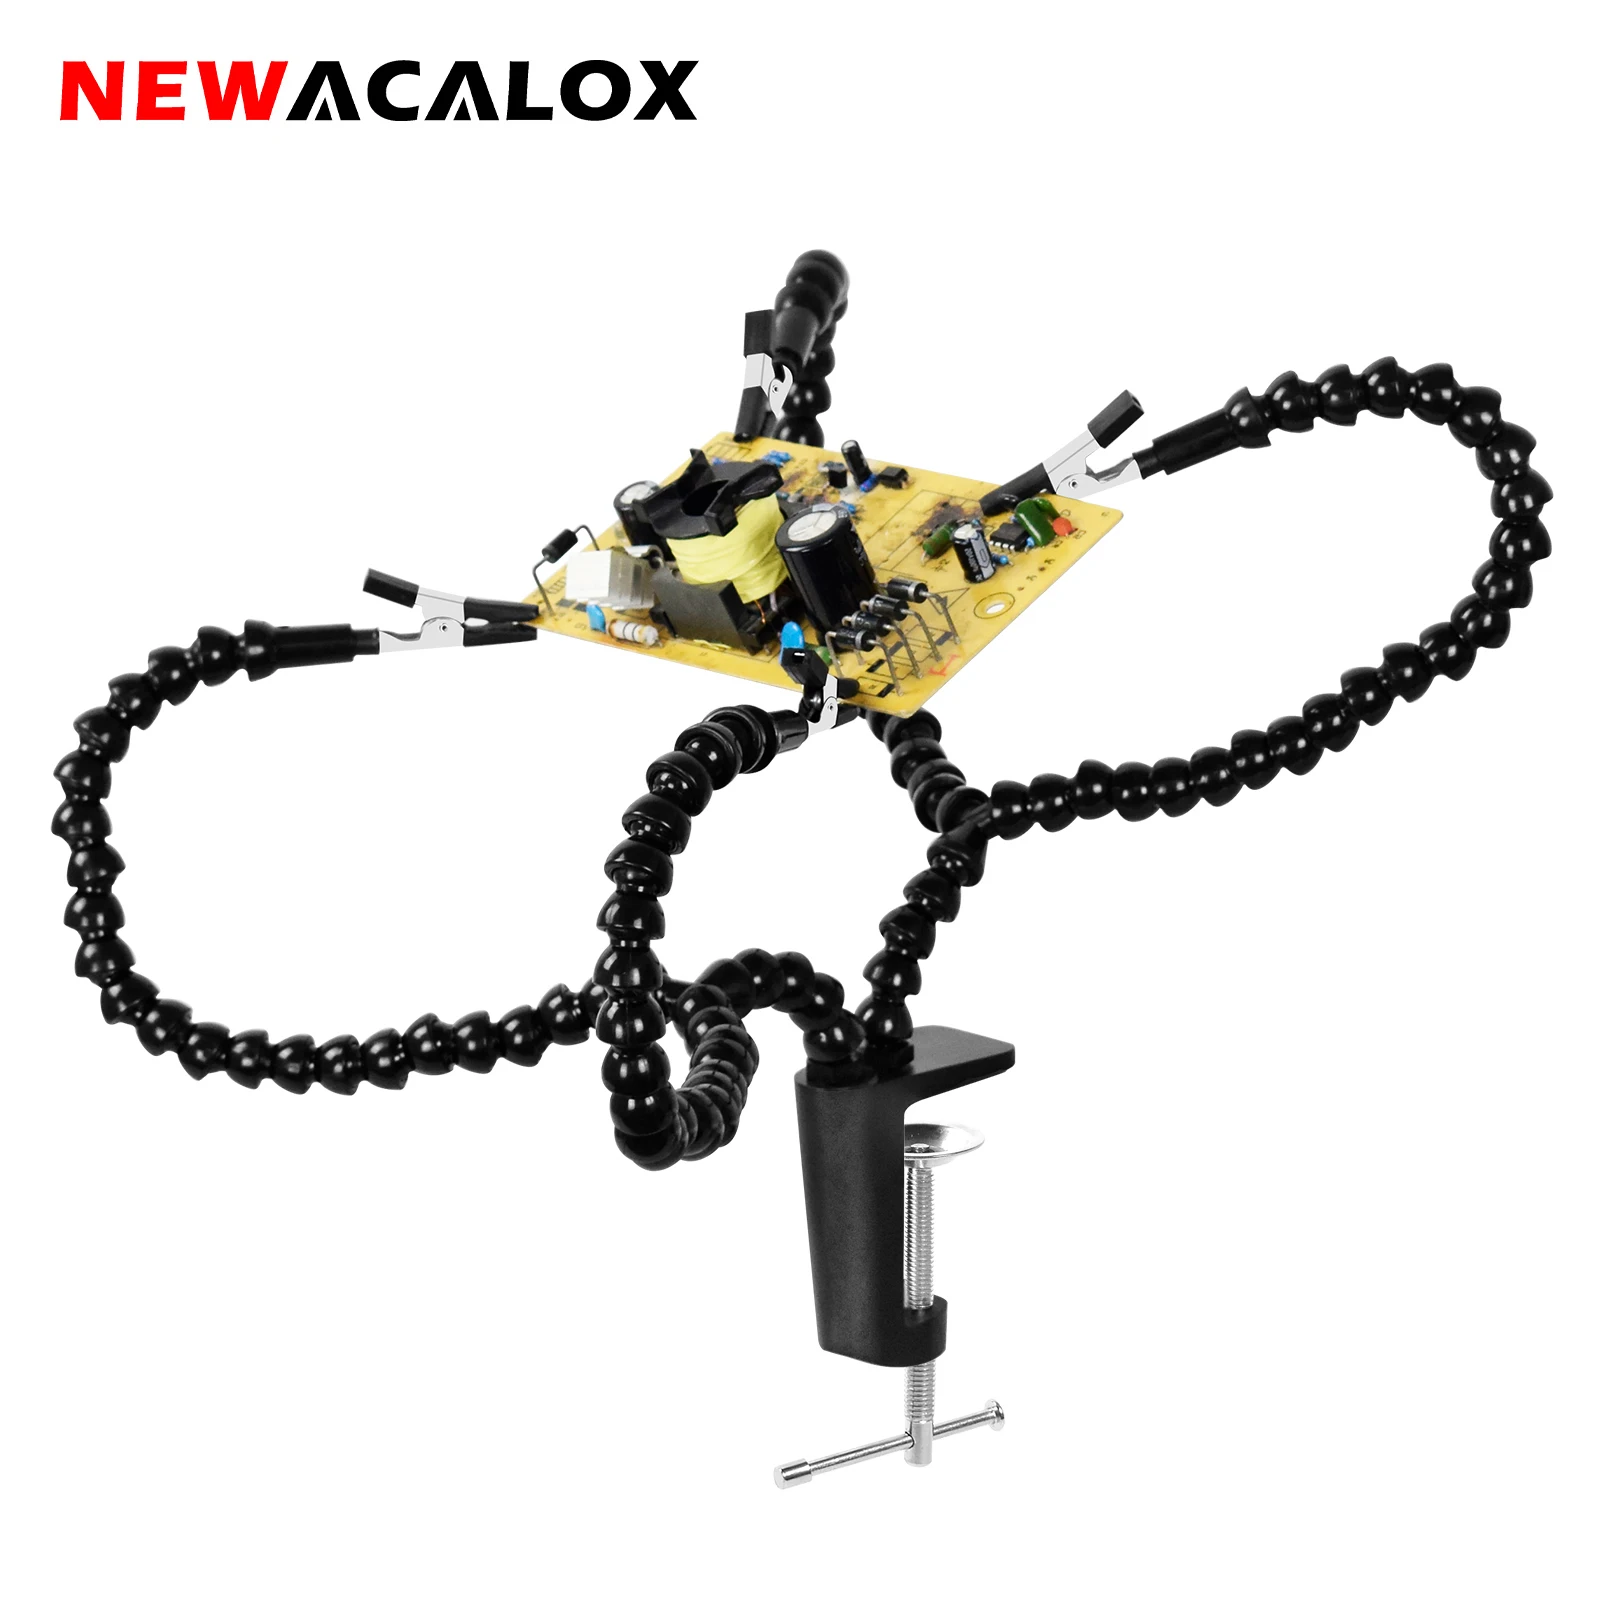 NEWACALOX 4 Pcs Flexible Arm Helping Hands Third Hand Soldering Tool PCB Holder  Welding Stand for PCB Repairing Circuit Board newacalox magnetic pcb circuit board holder flexible arm soldering third hand welding station soldering iron stand repair tools